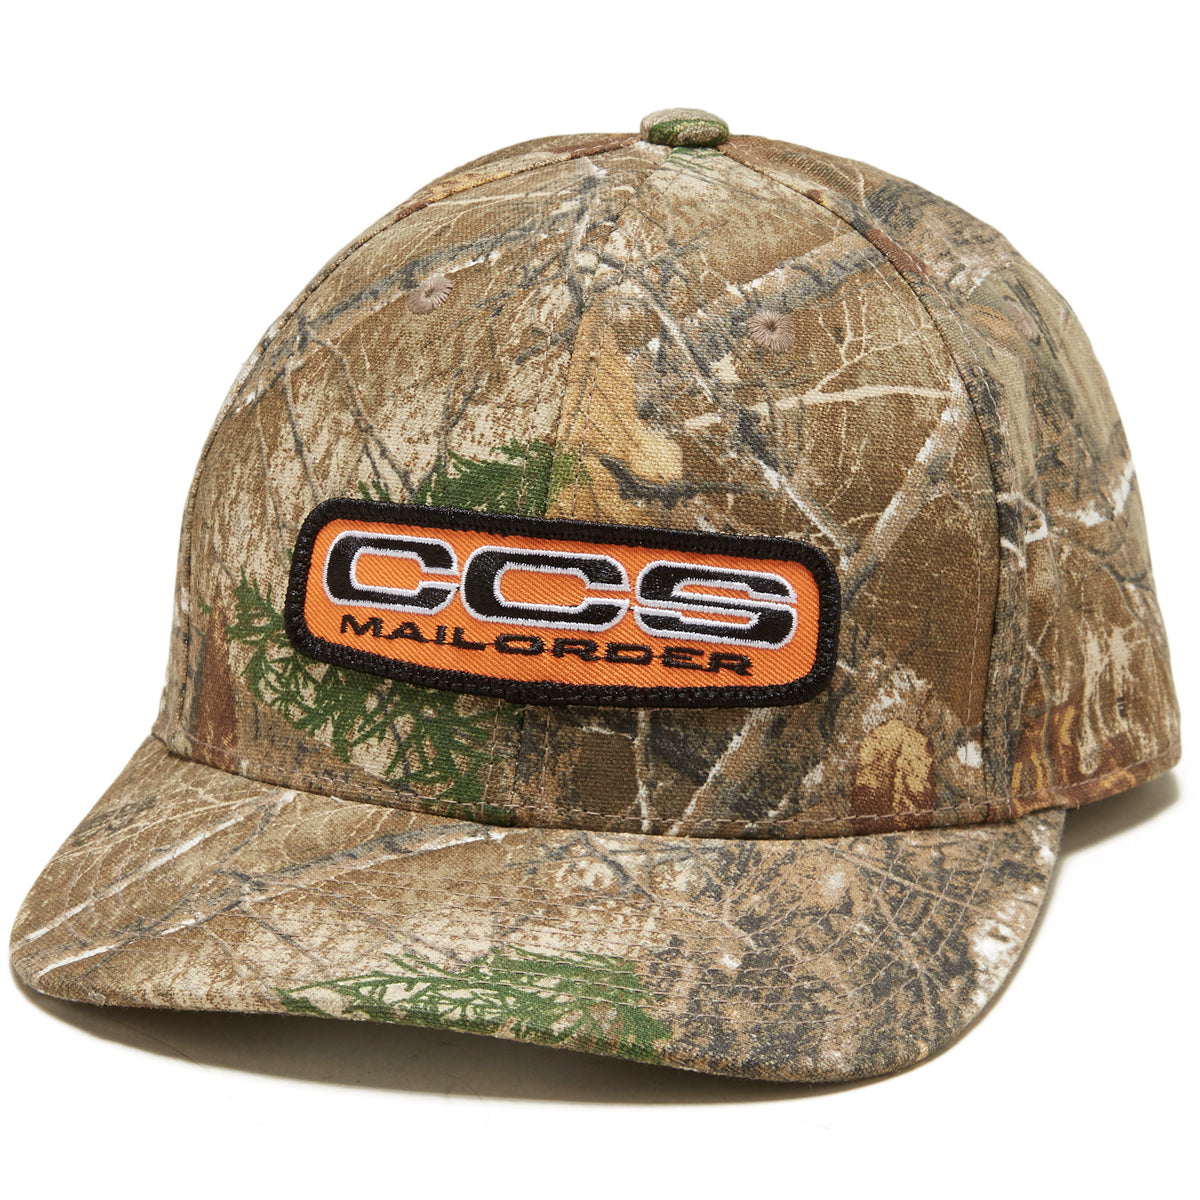 CCS x Realtree Mailorder Patch Hat - Edge image 1